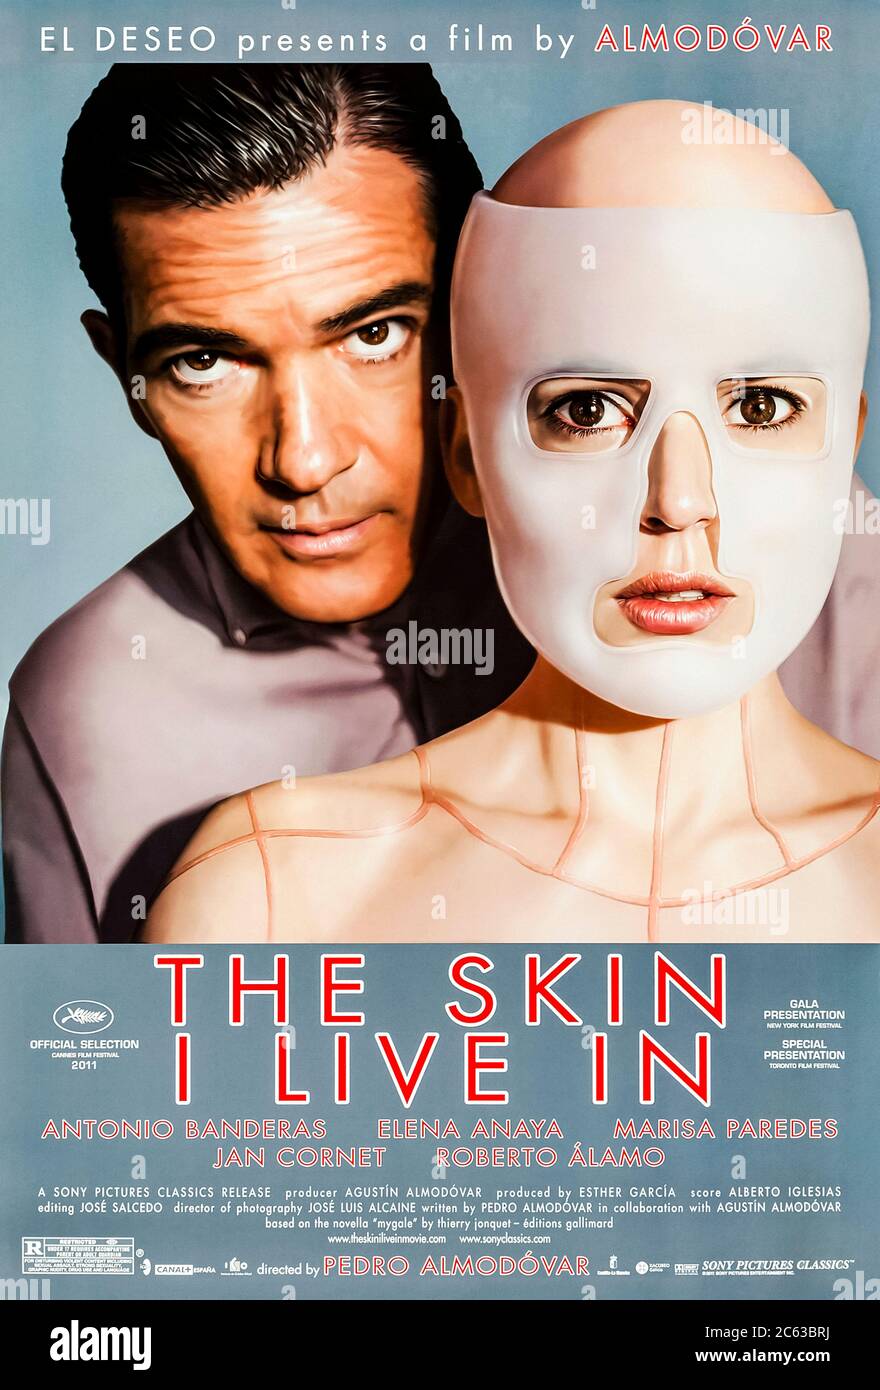 The Skin I Live In [La piel que habito] (2011) (2011) directed by Pedro Almodóvar and starring Antonio Banderas, Elena Anaya, Jan Cornet and Roberto Álamo. A plastic surgeon develops an artificial skin offering superior protection but secrets from his past catch up with him; based on a book by Thierry Jonquet. Stock Photo